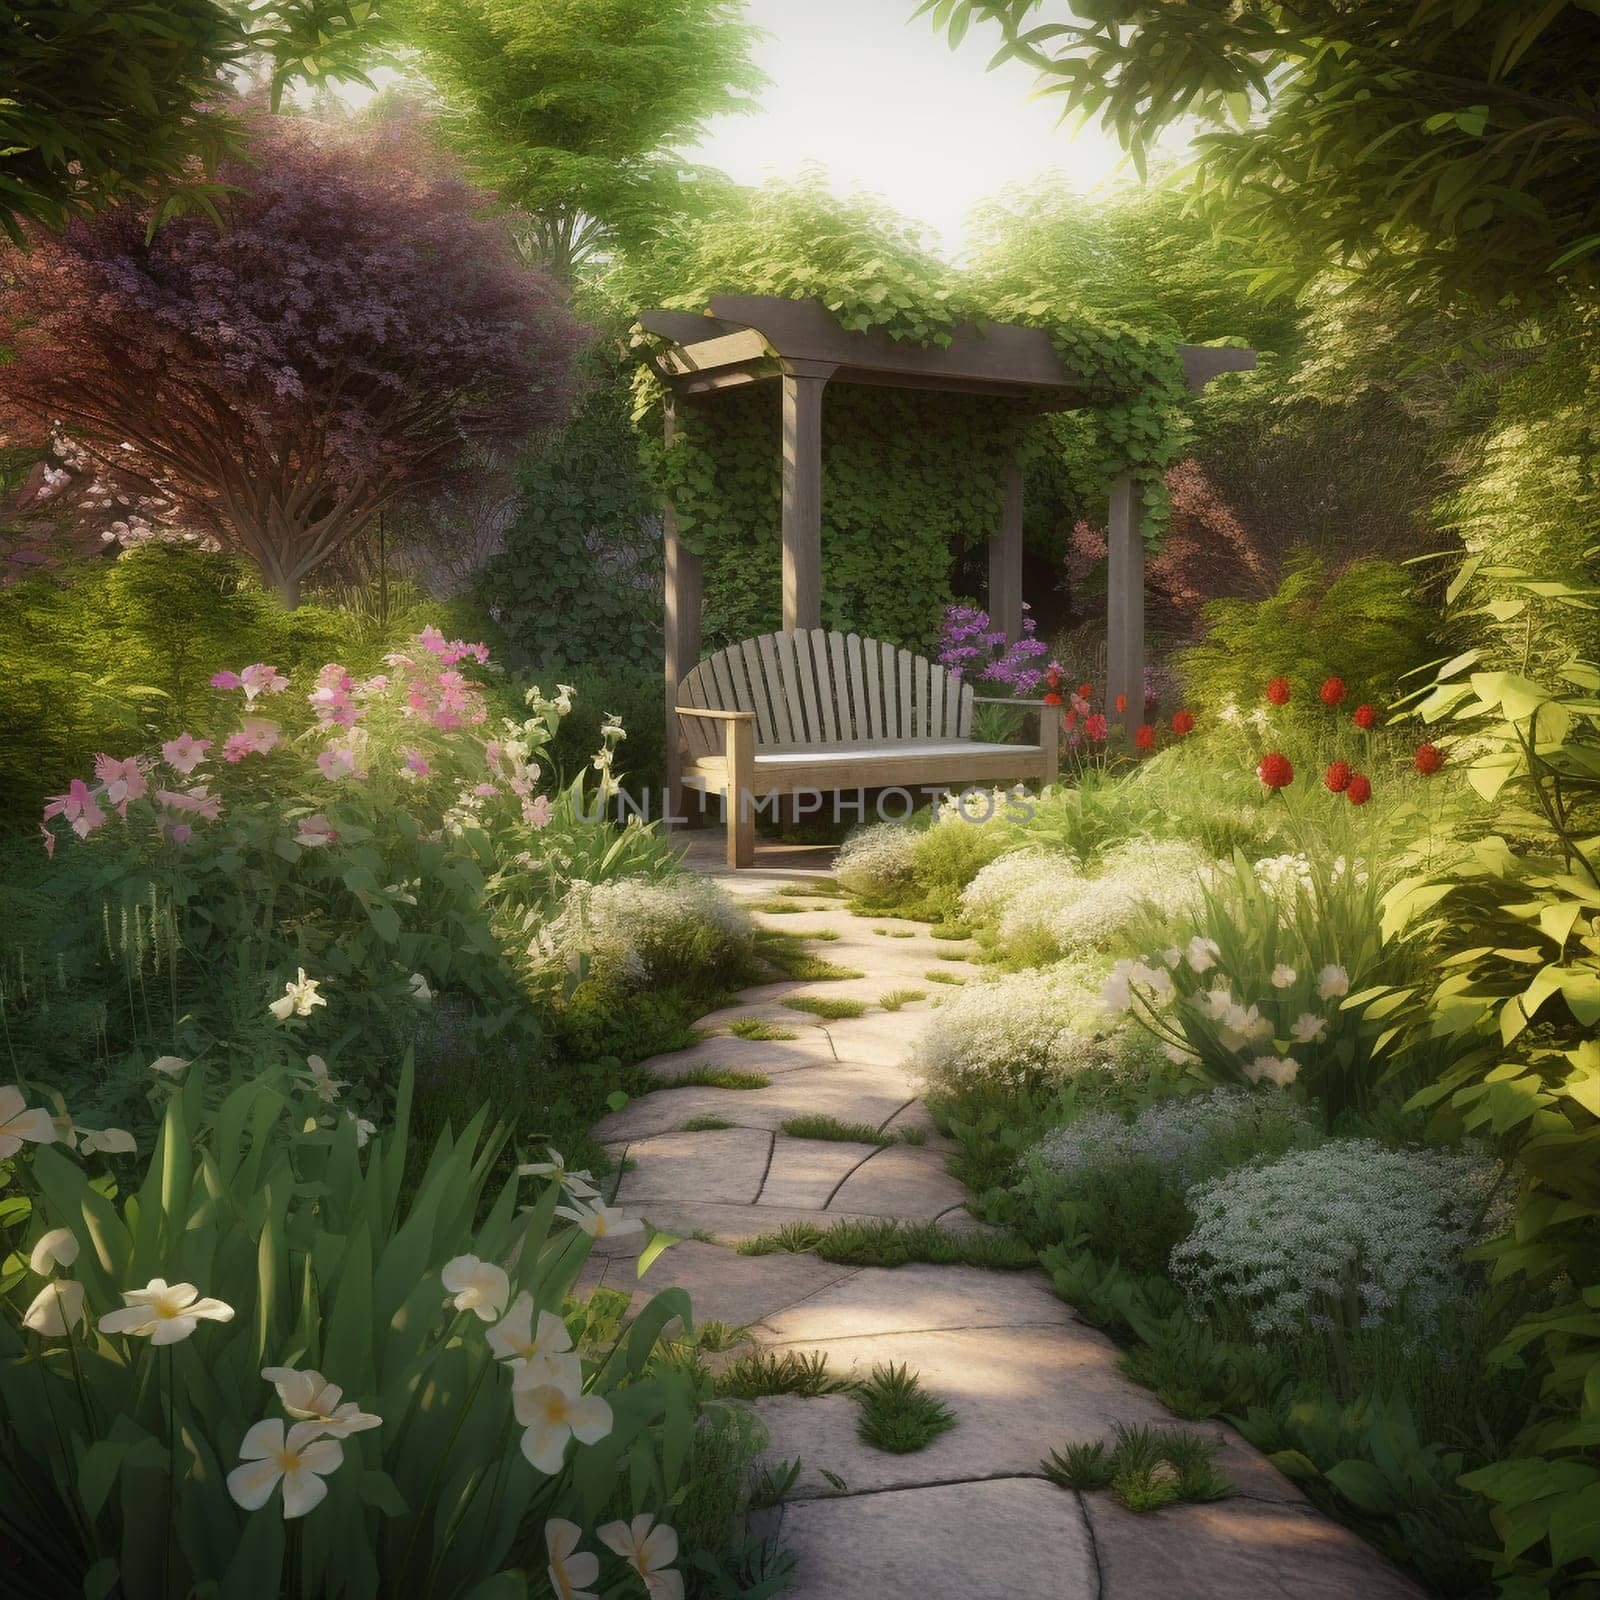 Step into a world of tranquility and beauty with this serene, tranquil garden featuring beautiful flowers and foliage. The garden is well-tended and vibrant, with a sense of peace and calm. Pathways, seating areas, or other features invite the viewer to linger and explore, discovering new wonders with every step.